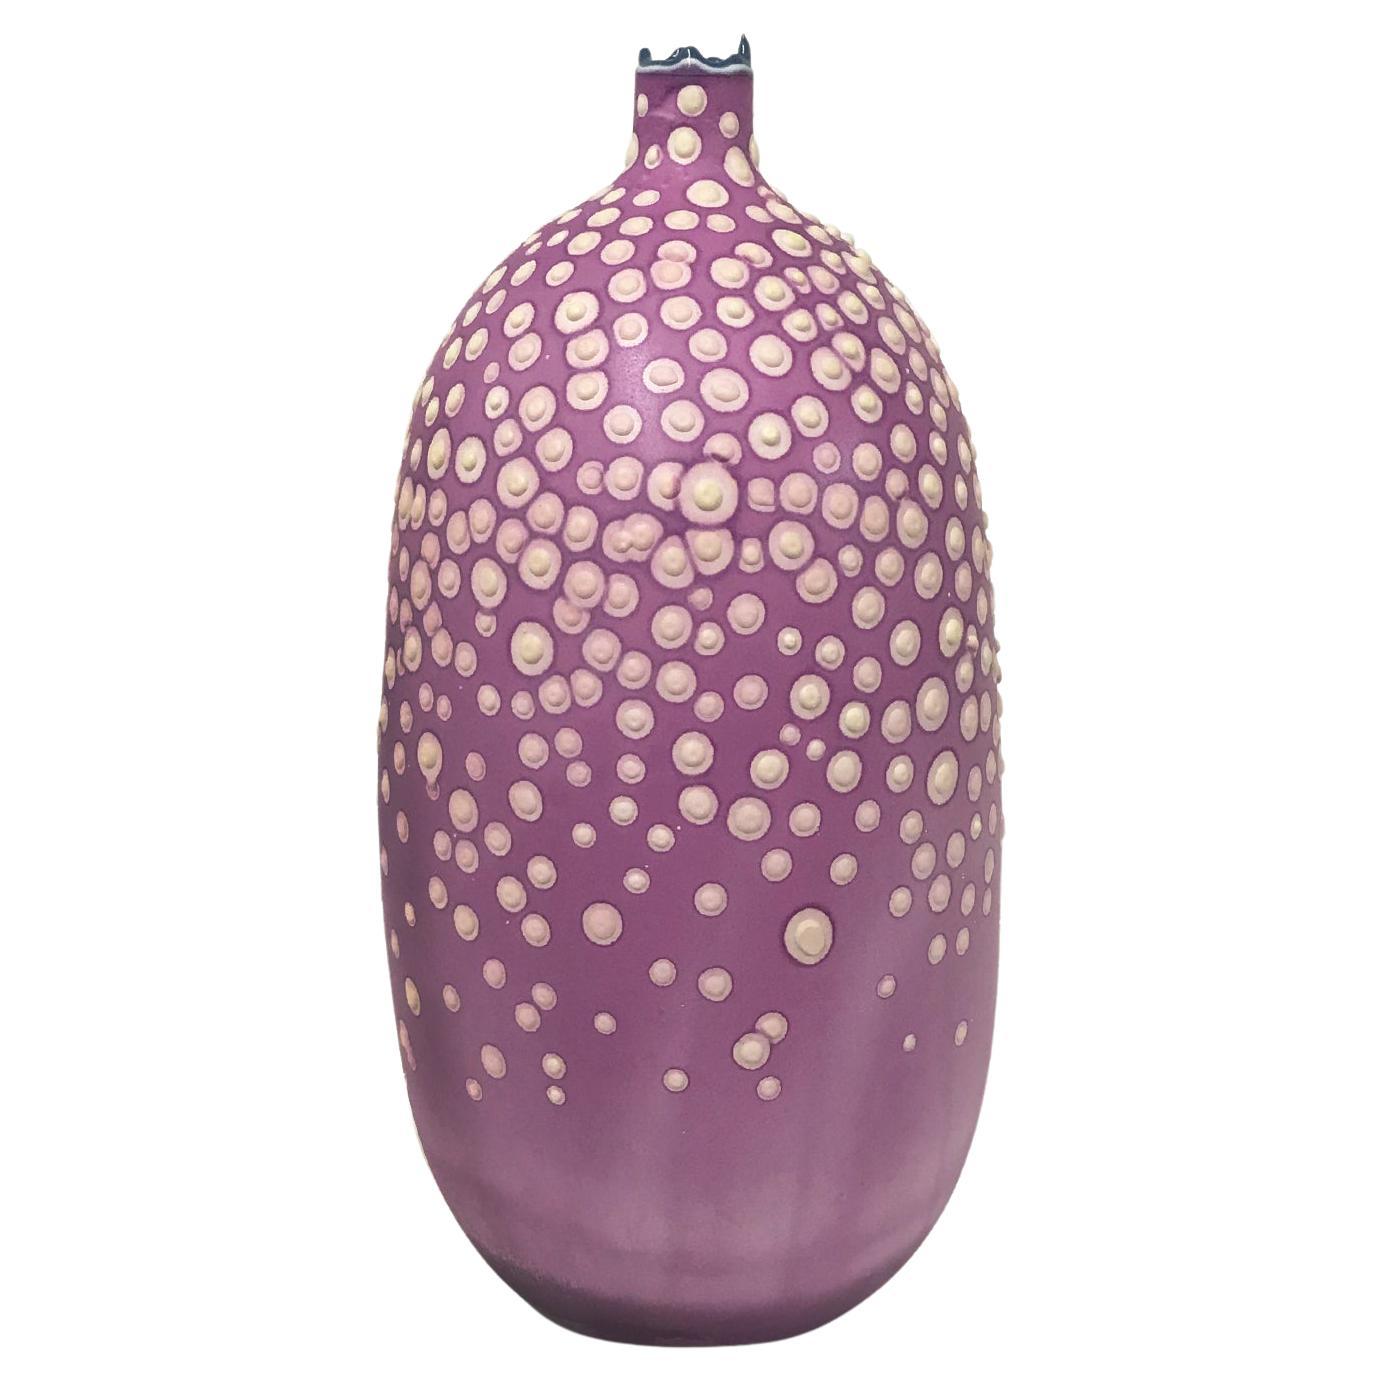 Unique Handmade 21st Century Oblong Vase in Orchid by Elyse Graham